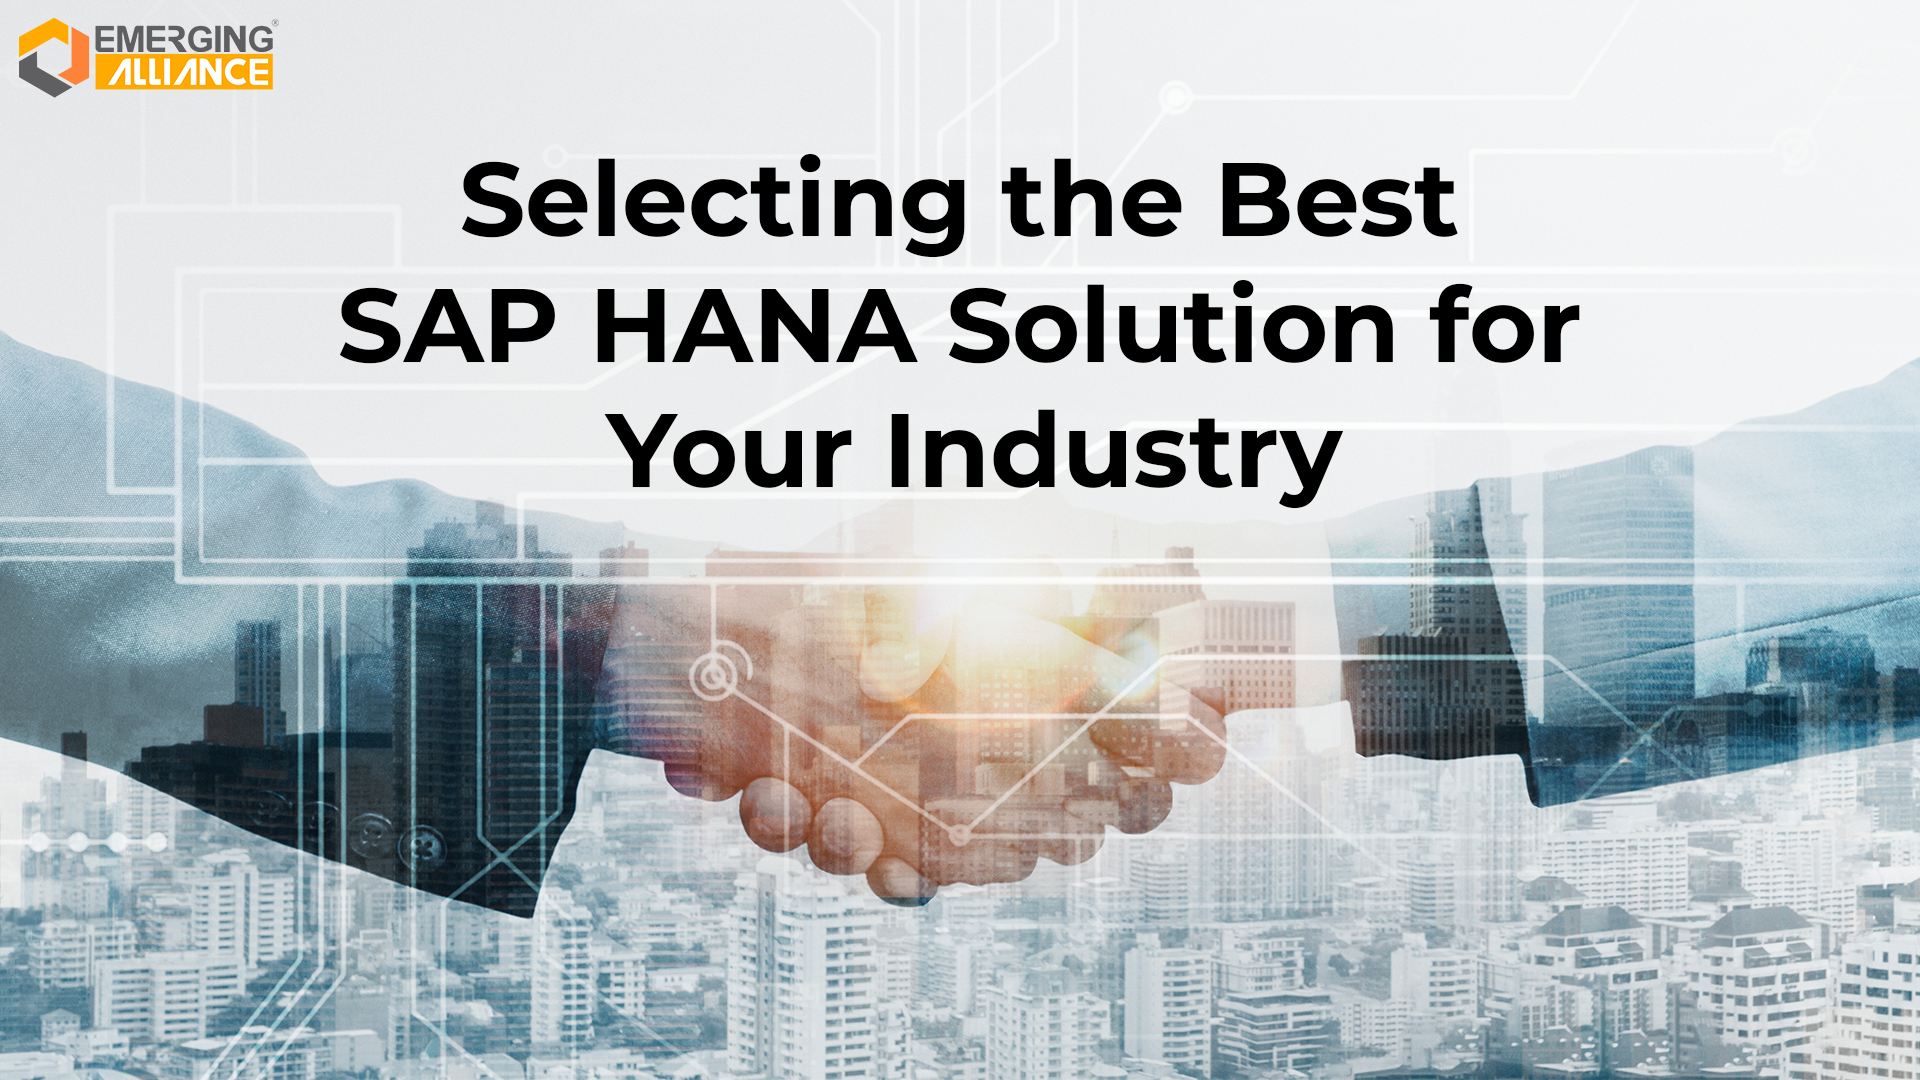 SAP HANA solution for your industry